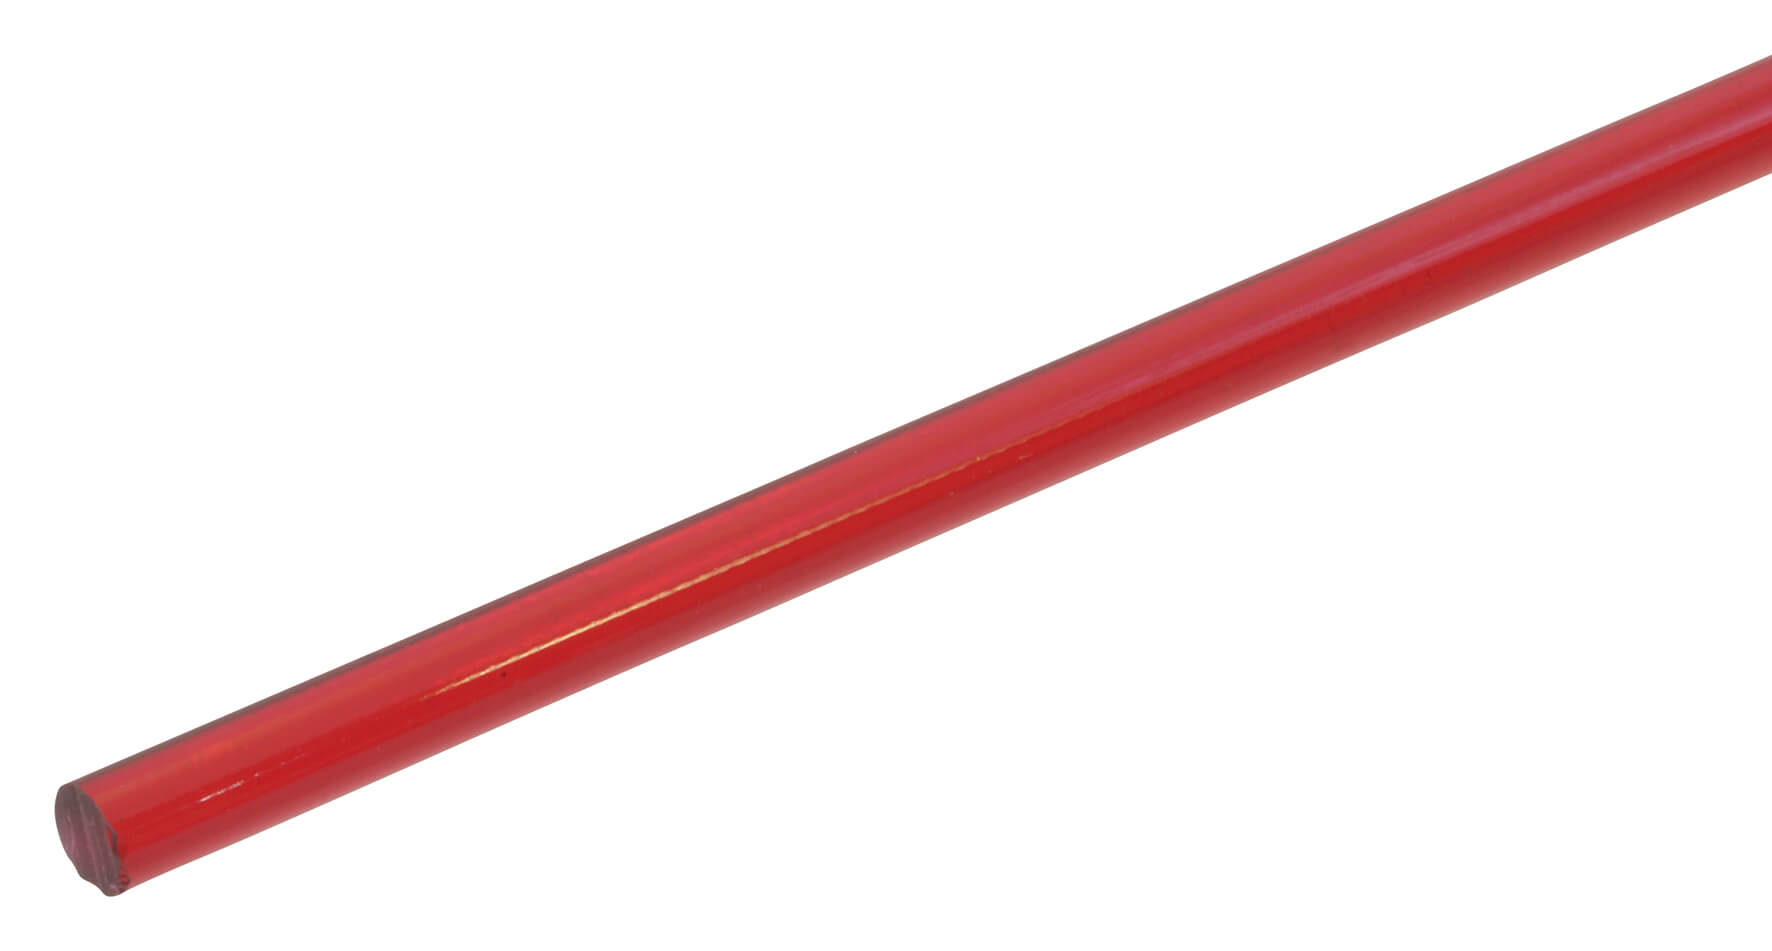 Transparent Acrylic Rod 6.4mm x 610mm  - Red